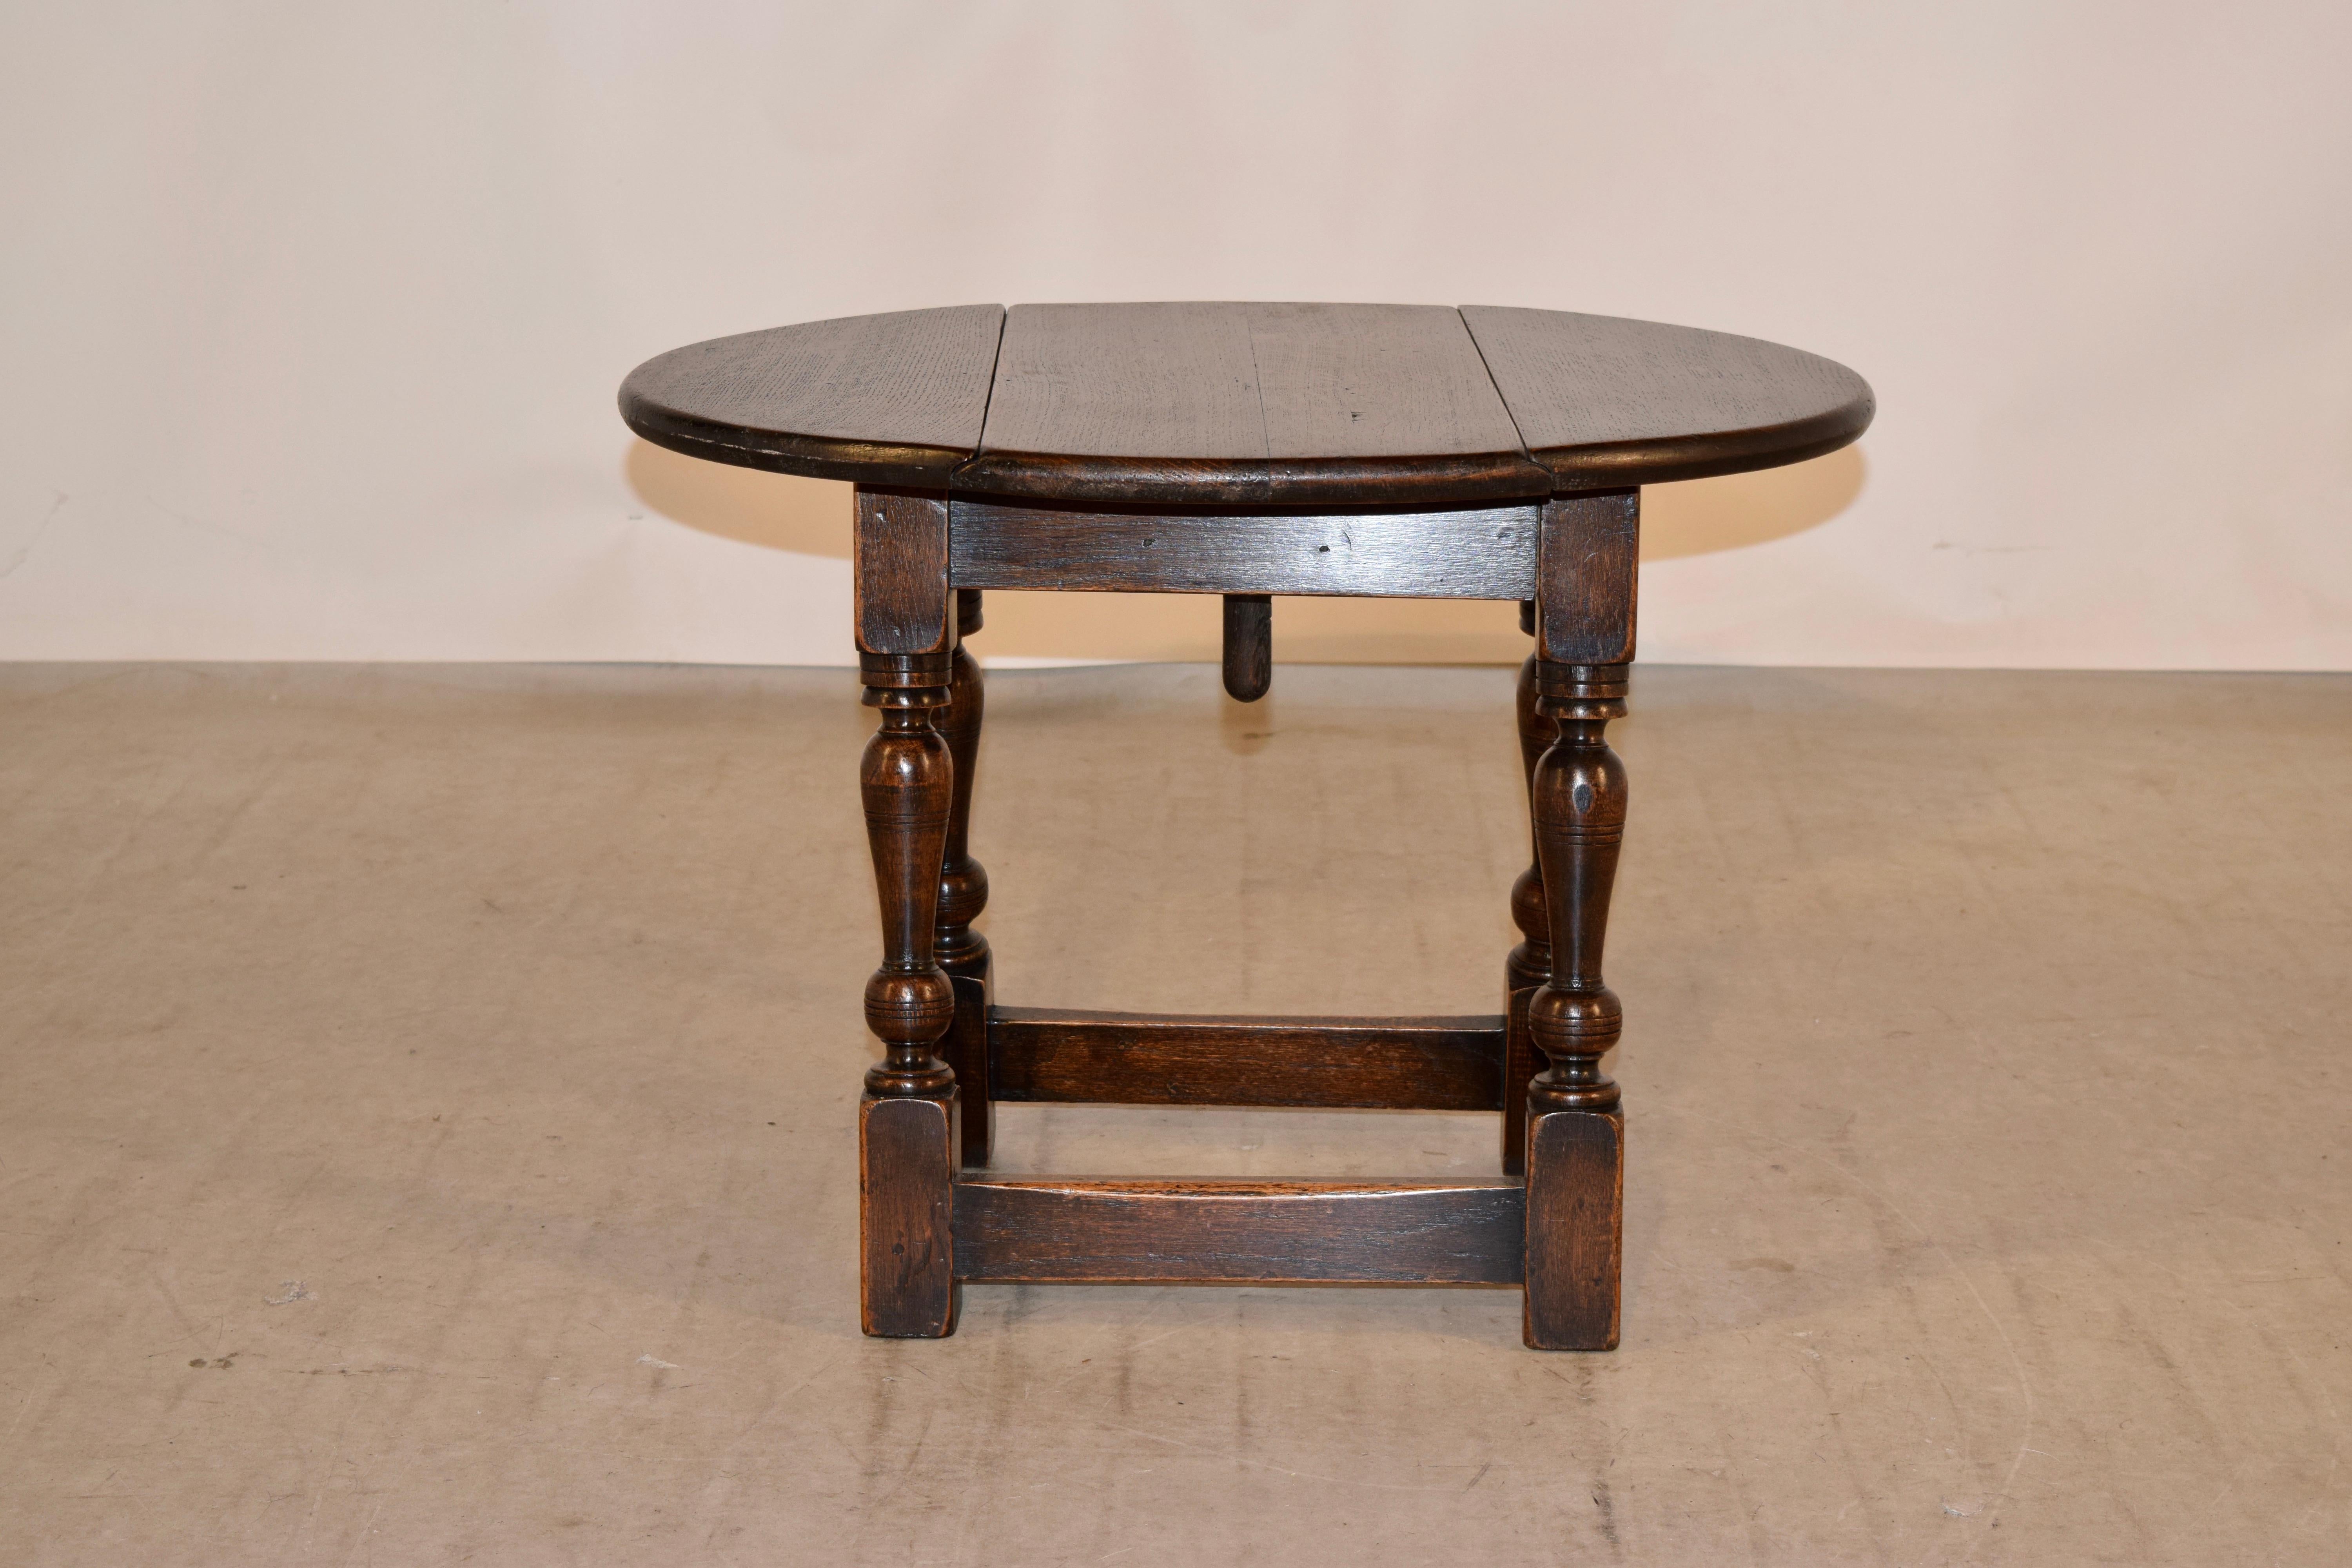 Turned 19th Century Small Drop-Leaf Table